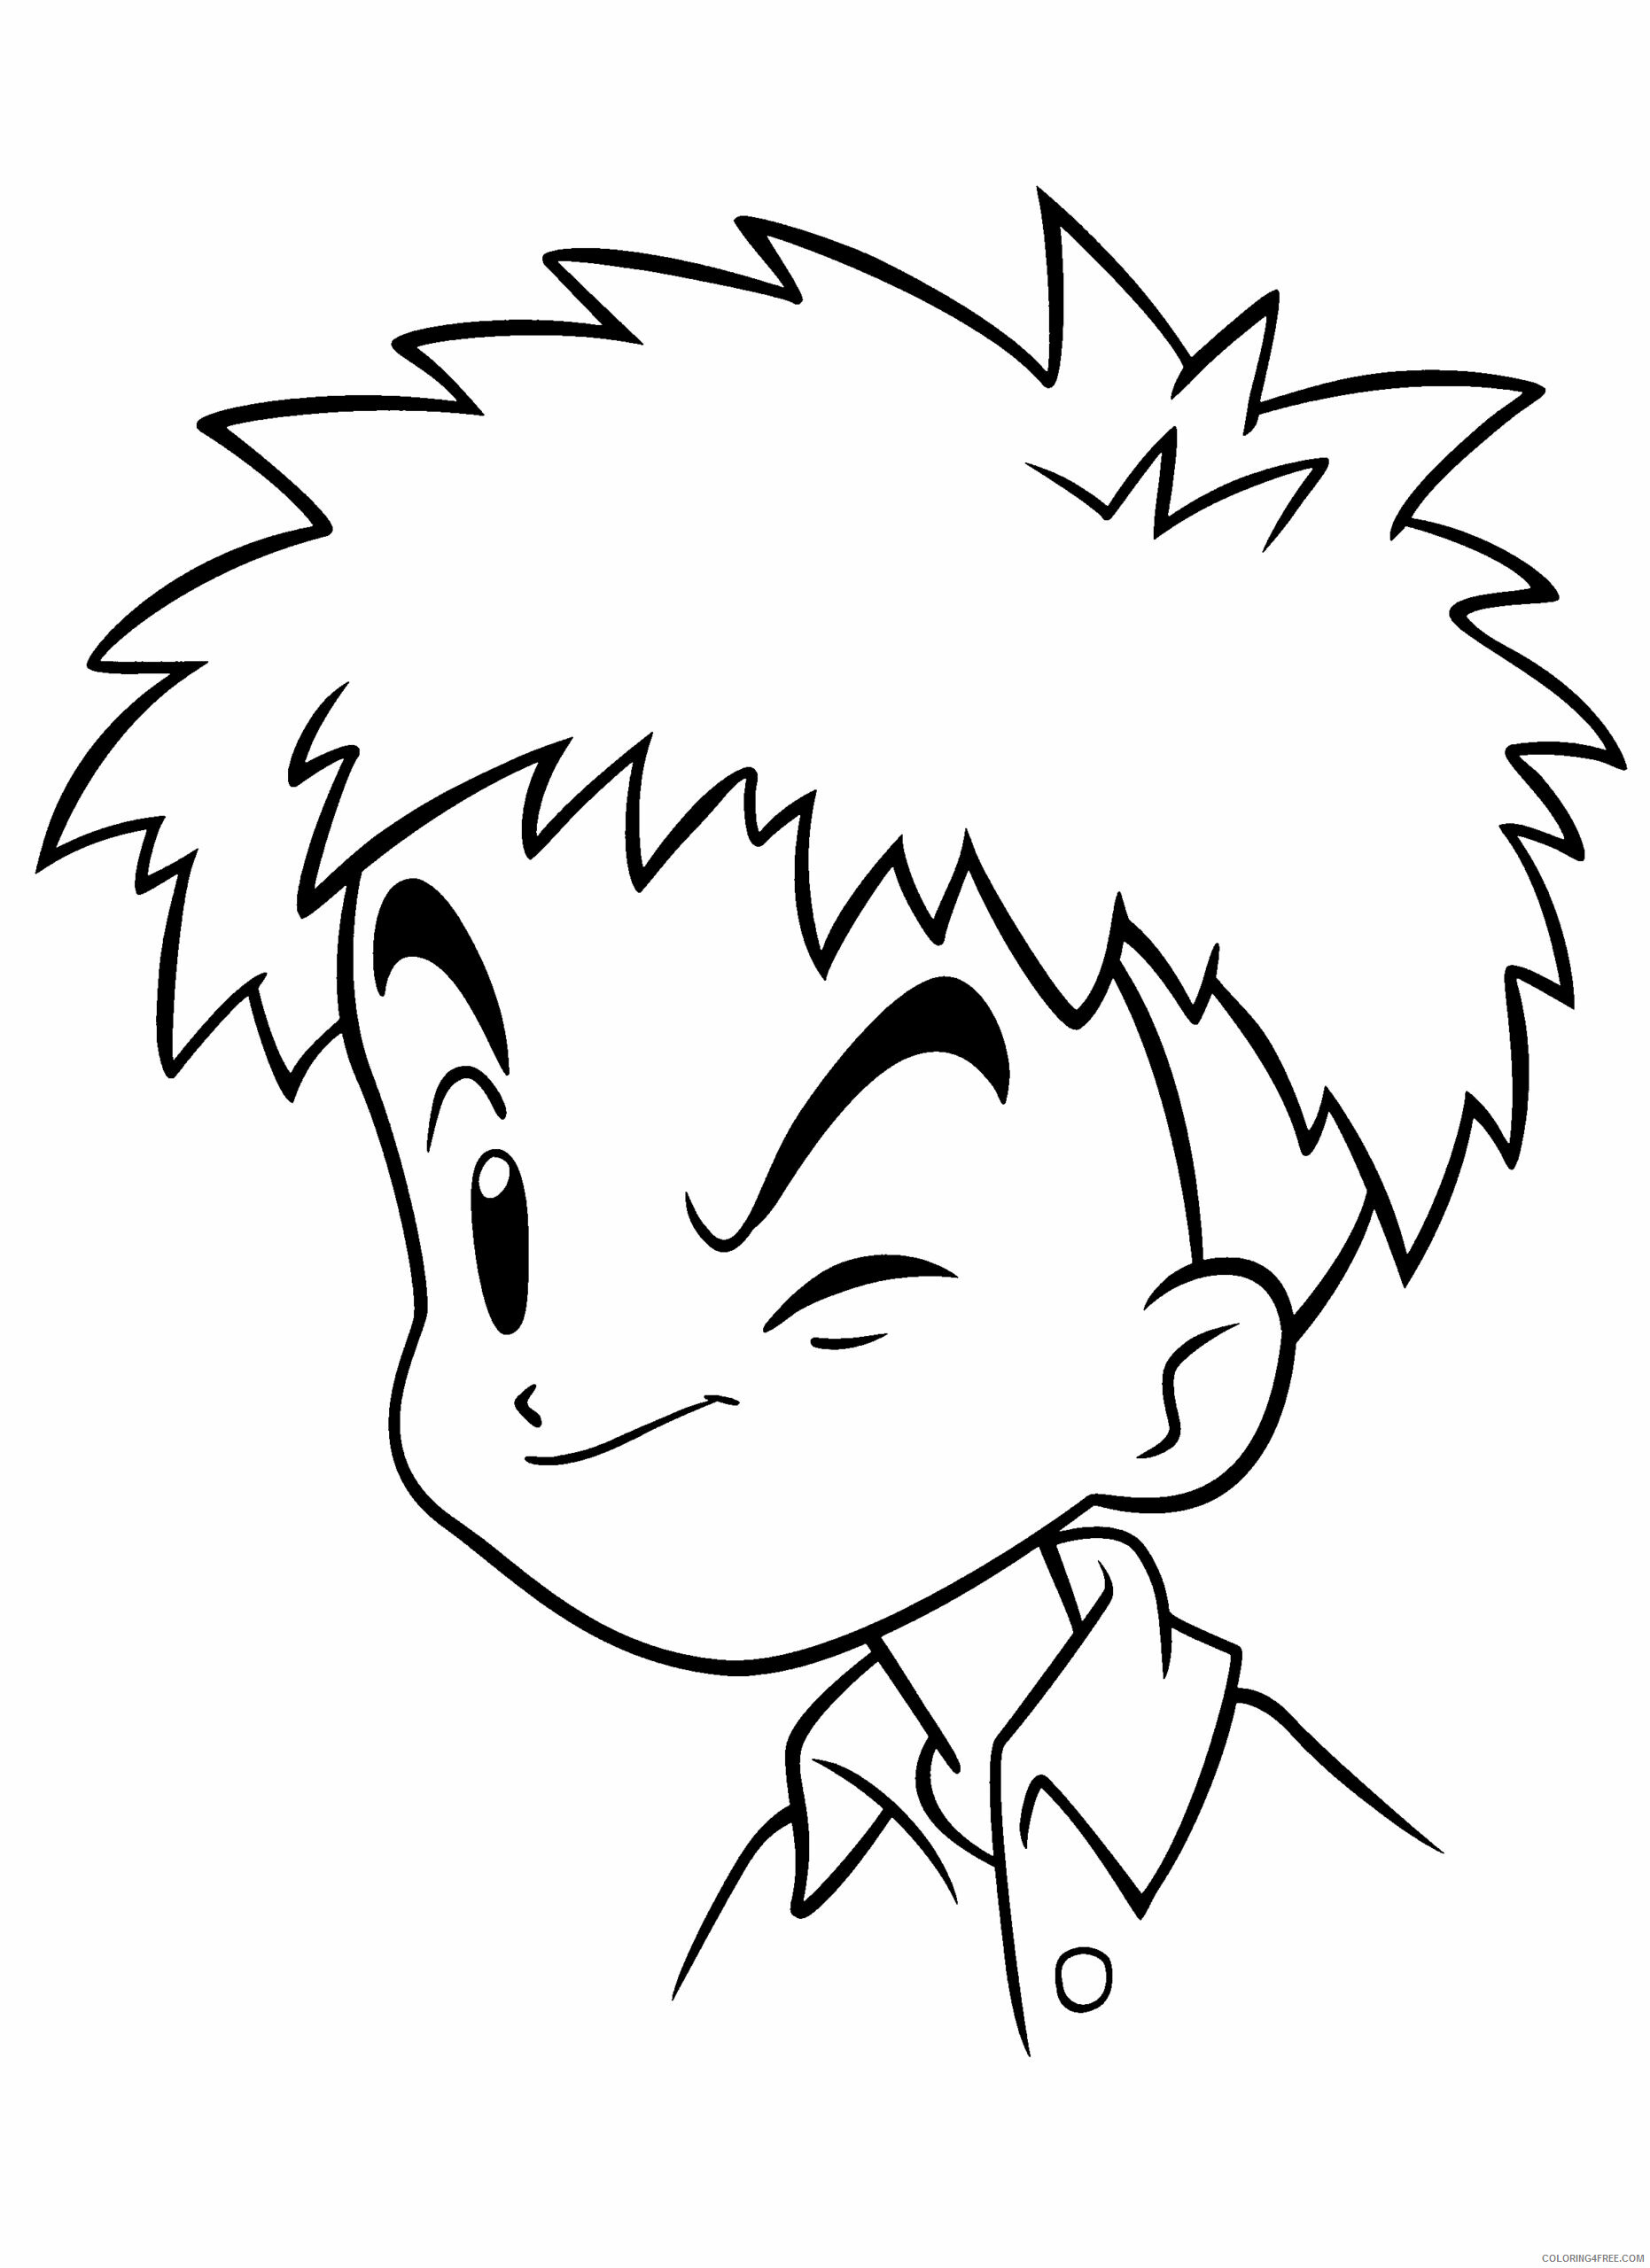 Digimon Printable Coloring Pages Anime digimon Dk3q4 2021 0167 Coloring4free